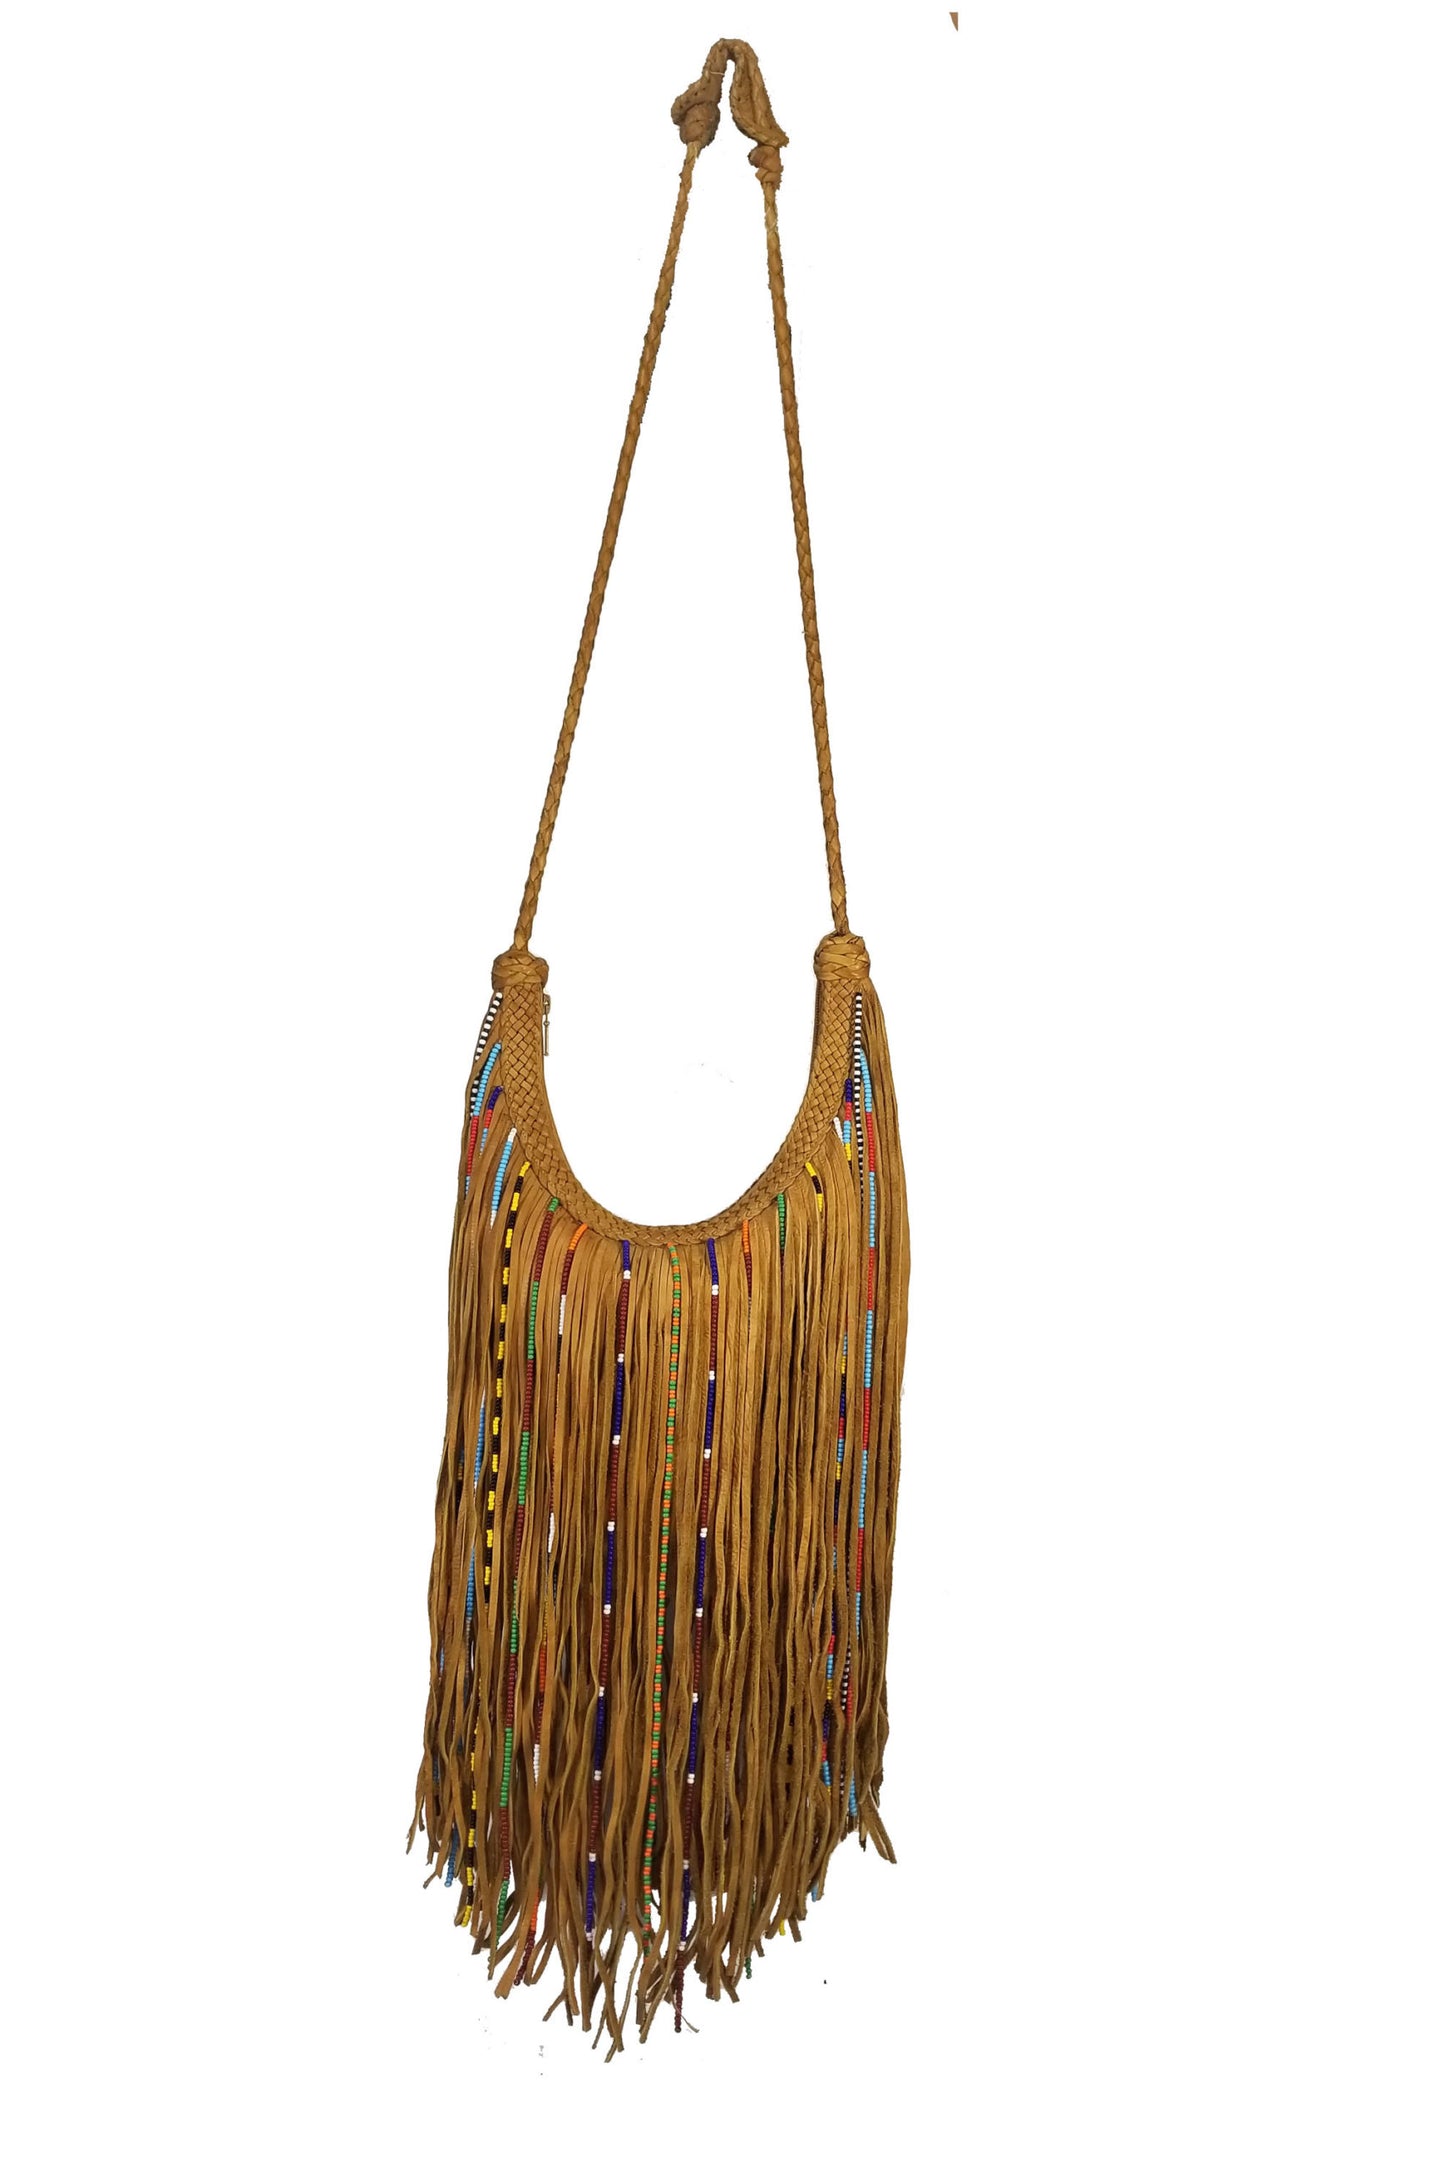 GYPSY BAG IN 3 COLORS